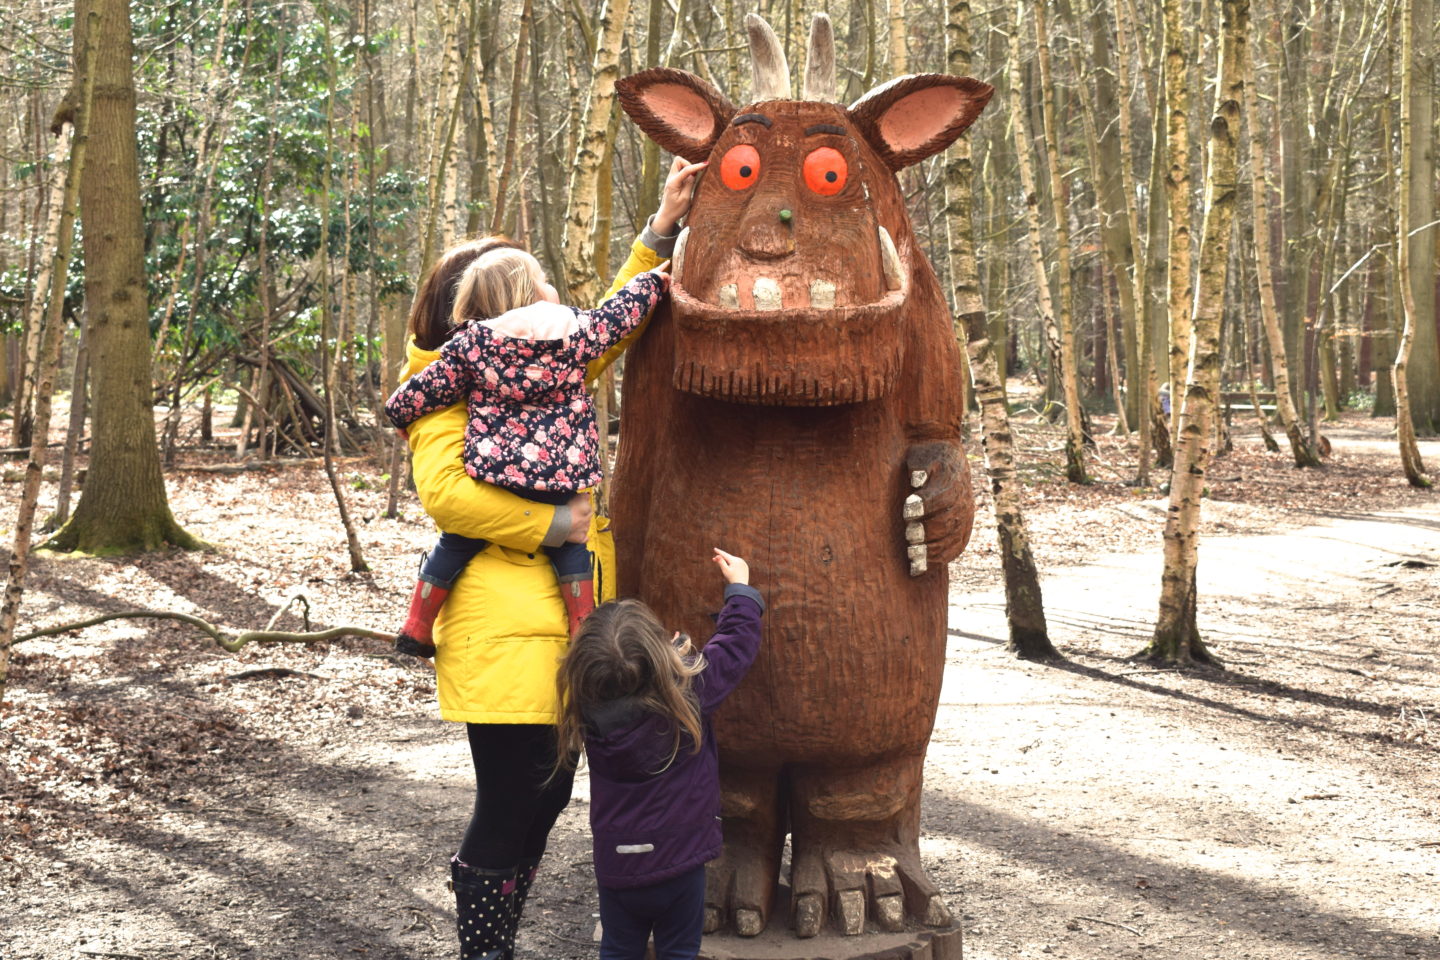 The Gruffalo Trail, Essex, The Gruffalo with mother and two children